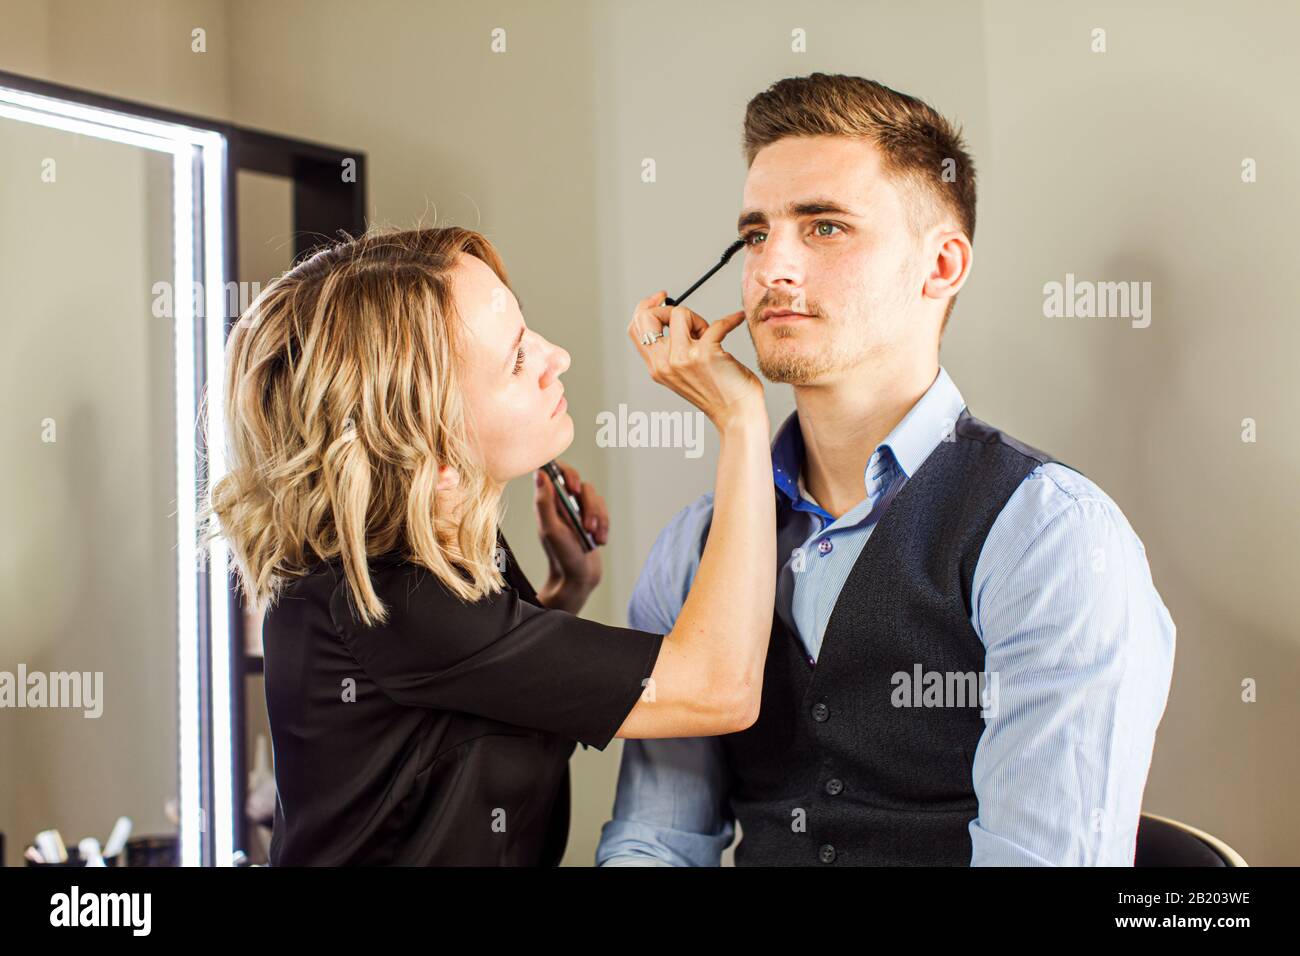 Professional actor preparation before shoot. Handsome young man applying by professional make up of visagist. Stock Photo